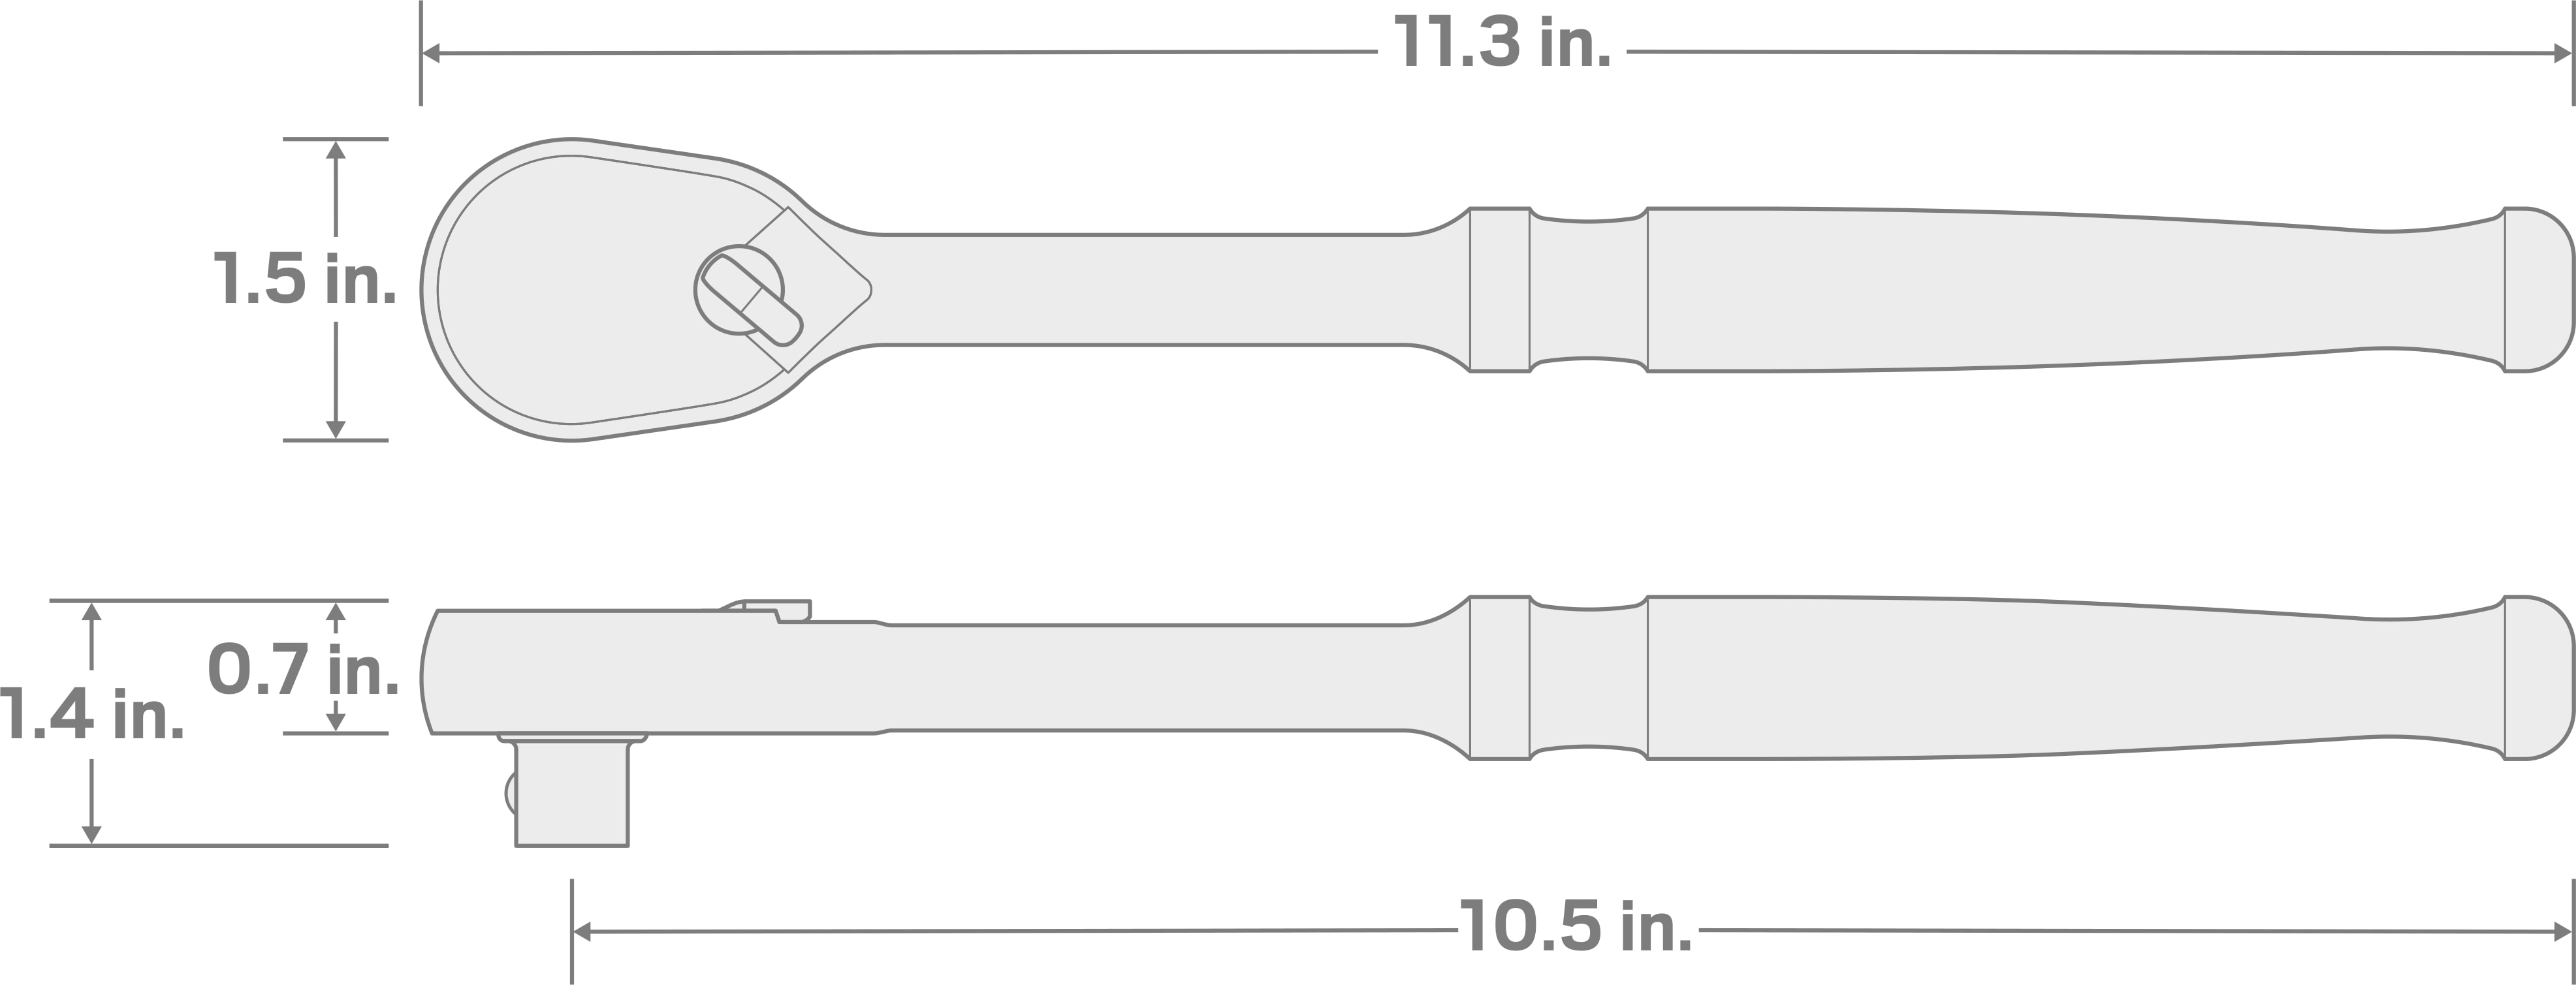 Specs for 1/2 Inch Drive x 10-1/2 Inch Ratchet